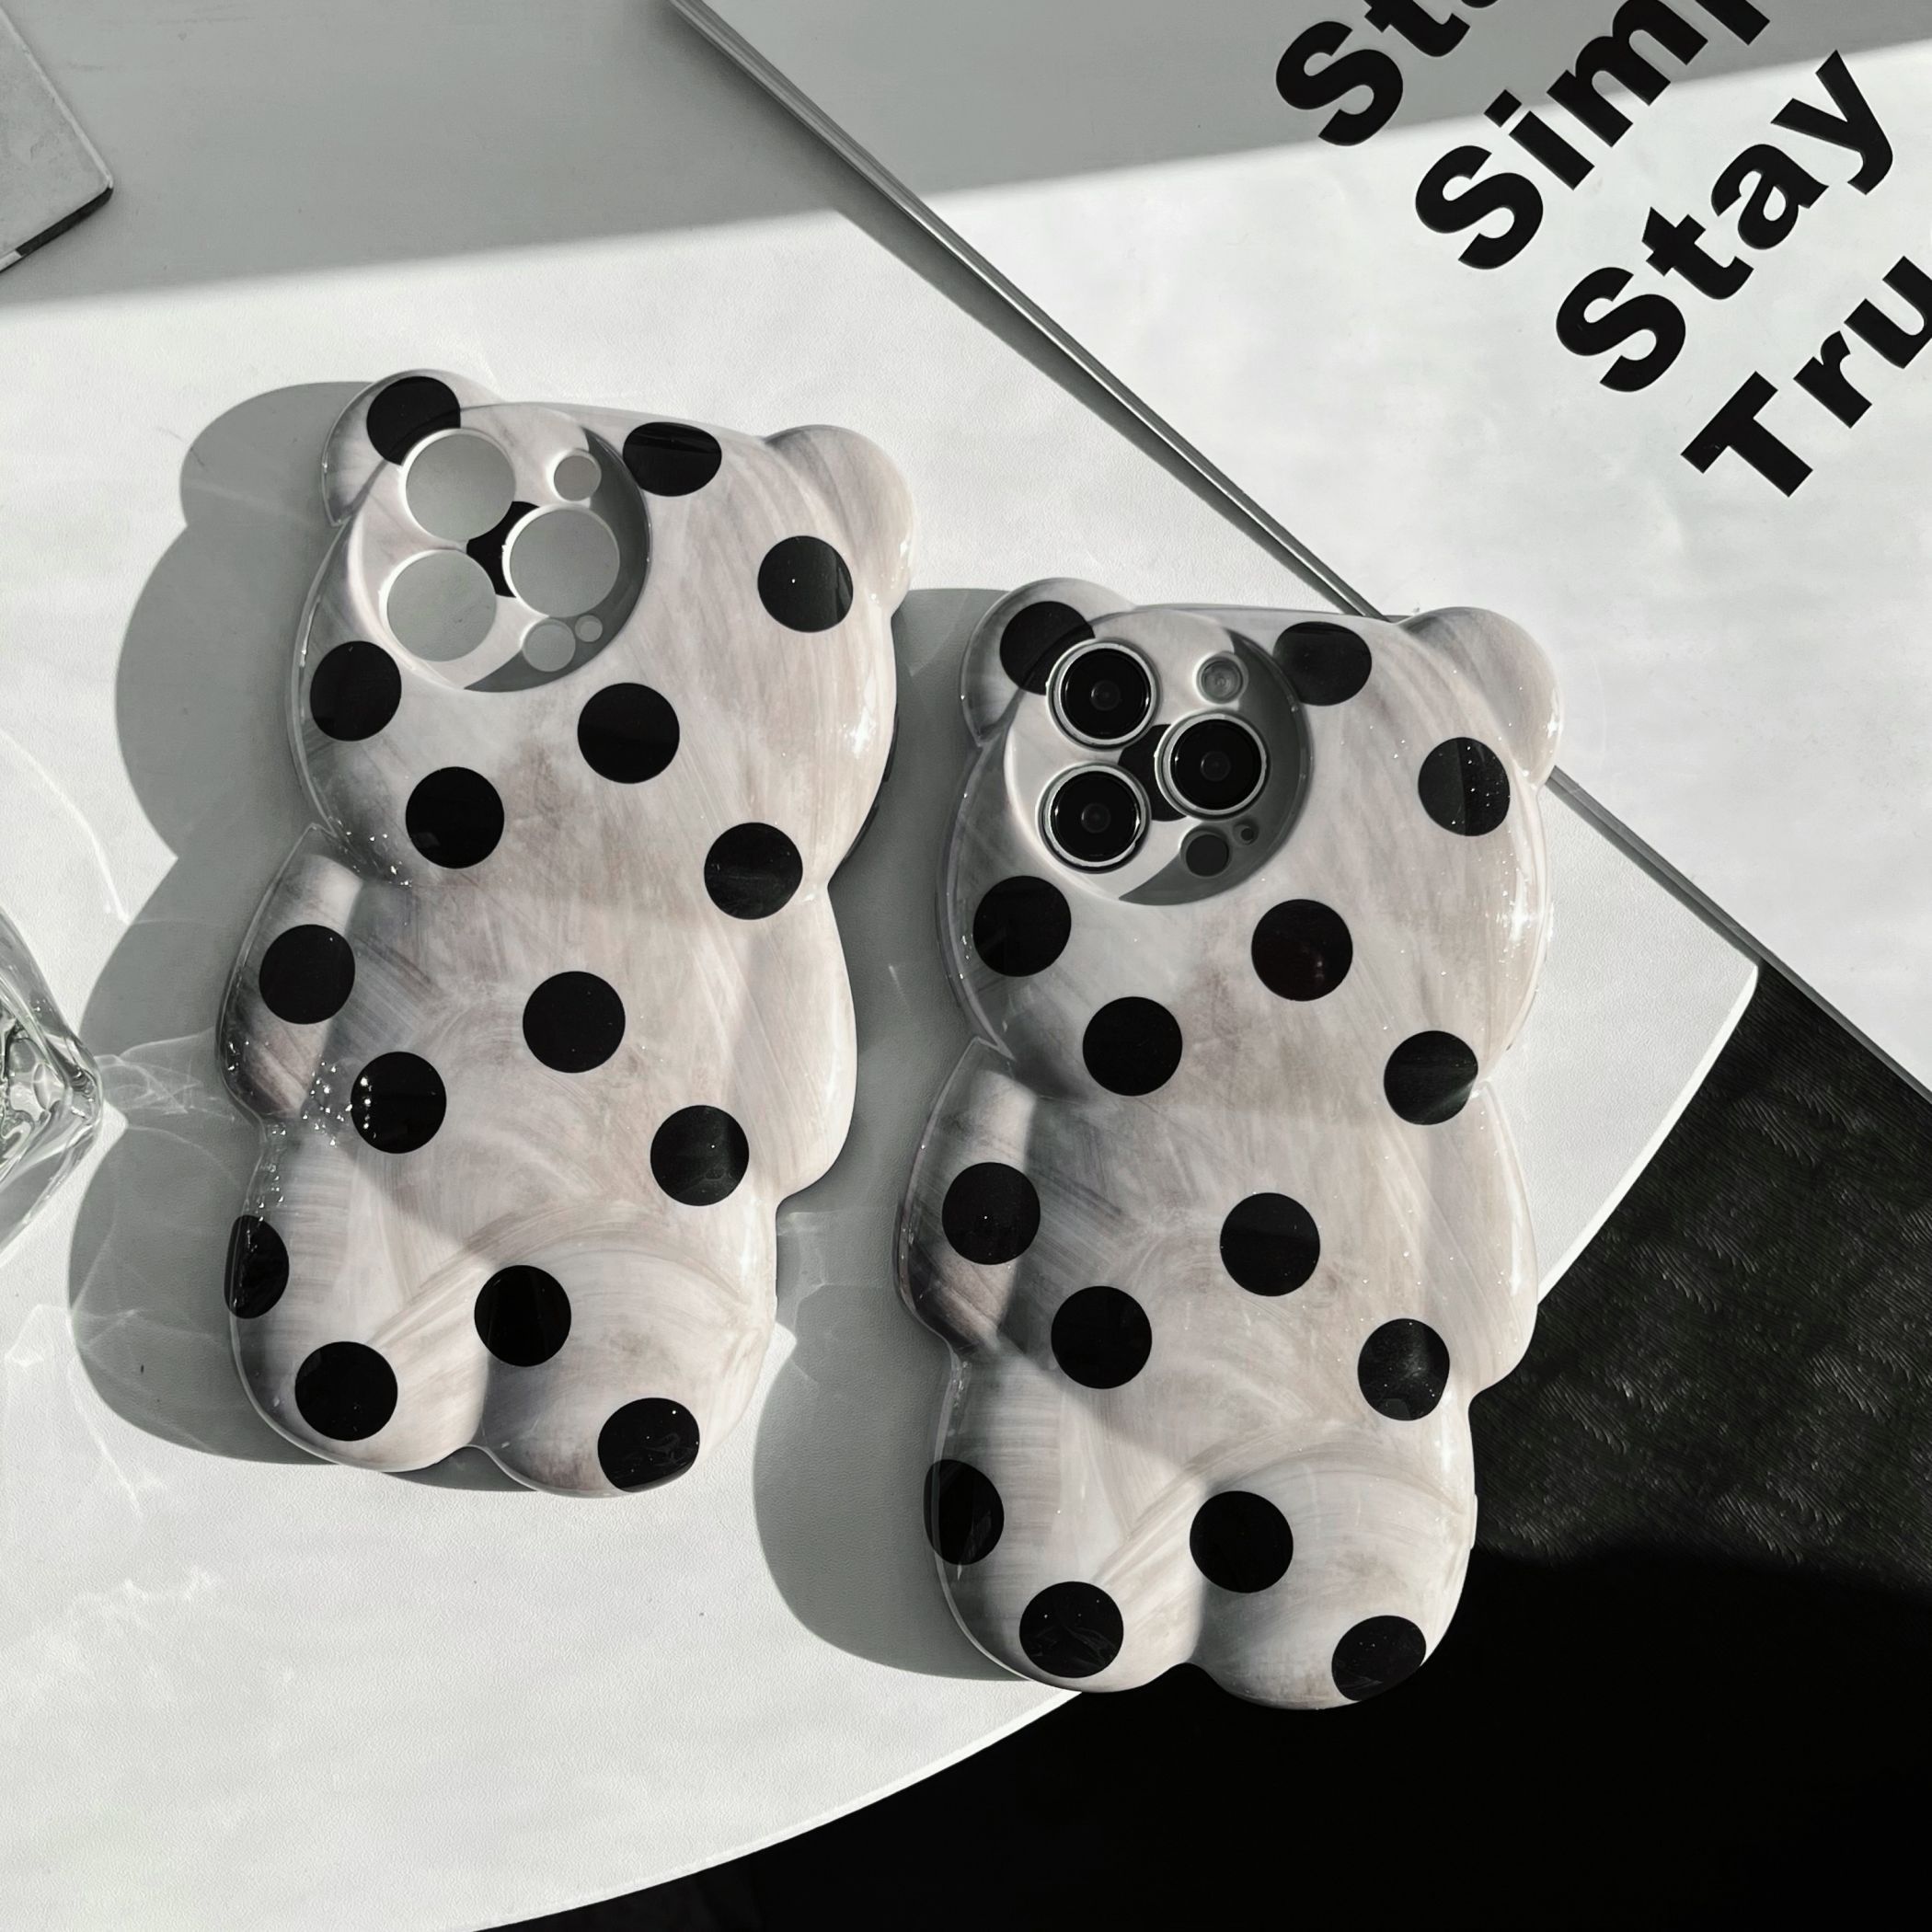 

Polka Dot Bear-shaped Tpu Phone Case Compatible With Iphone 11, 12, 13, 14, 15, Pro And Pro Max Models - Shockproof Protective Cover